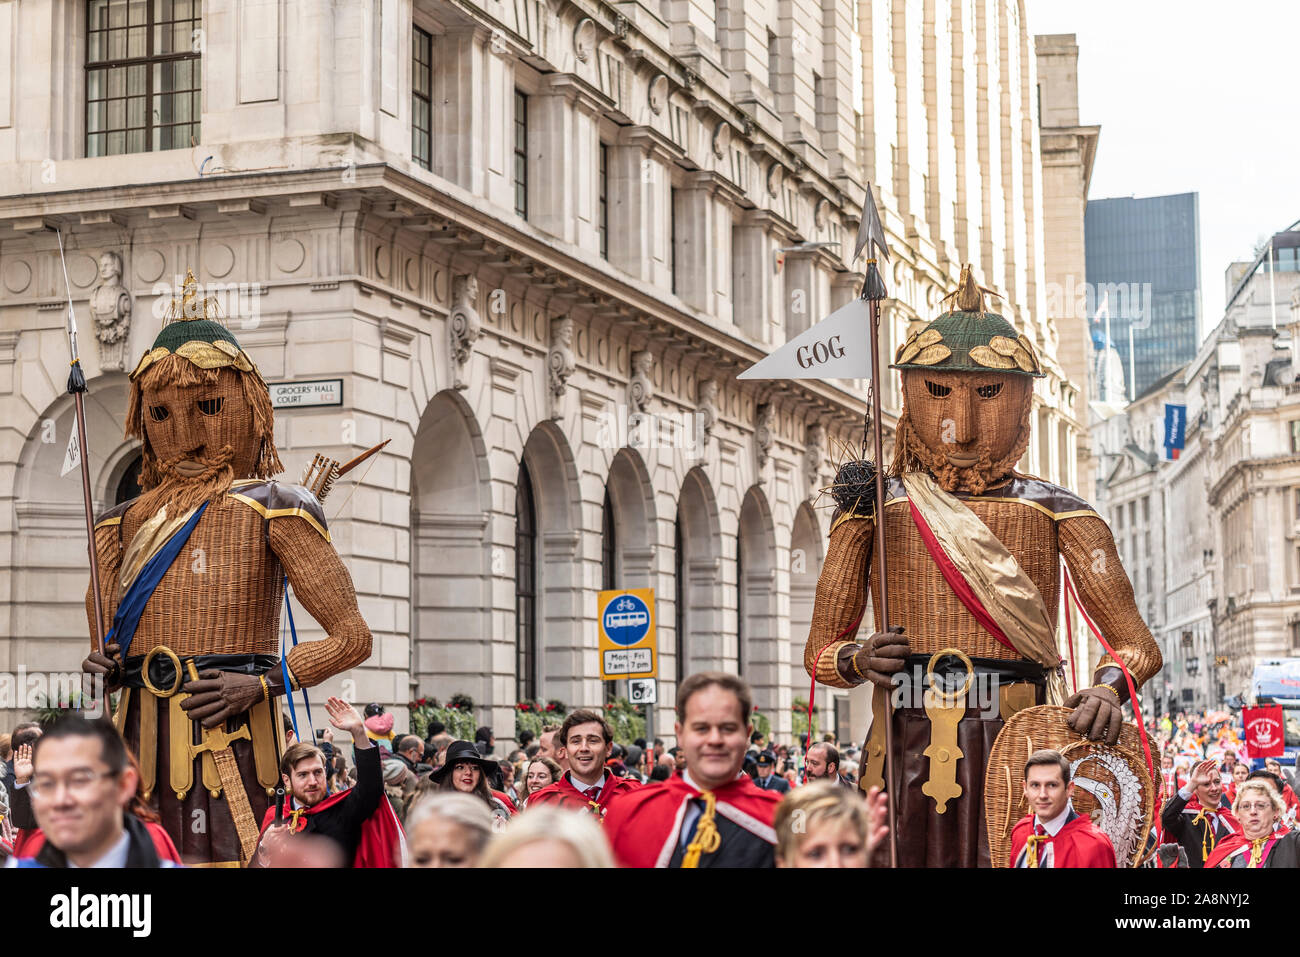 Gog & Magog Guild of Freemen at the Lord Mayor's Show Parade in City of London, UK. Stock Photo